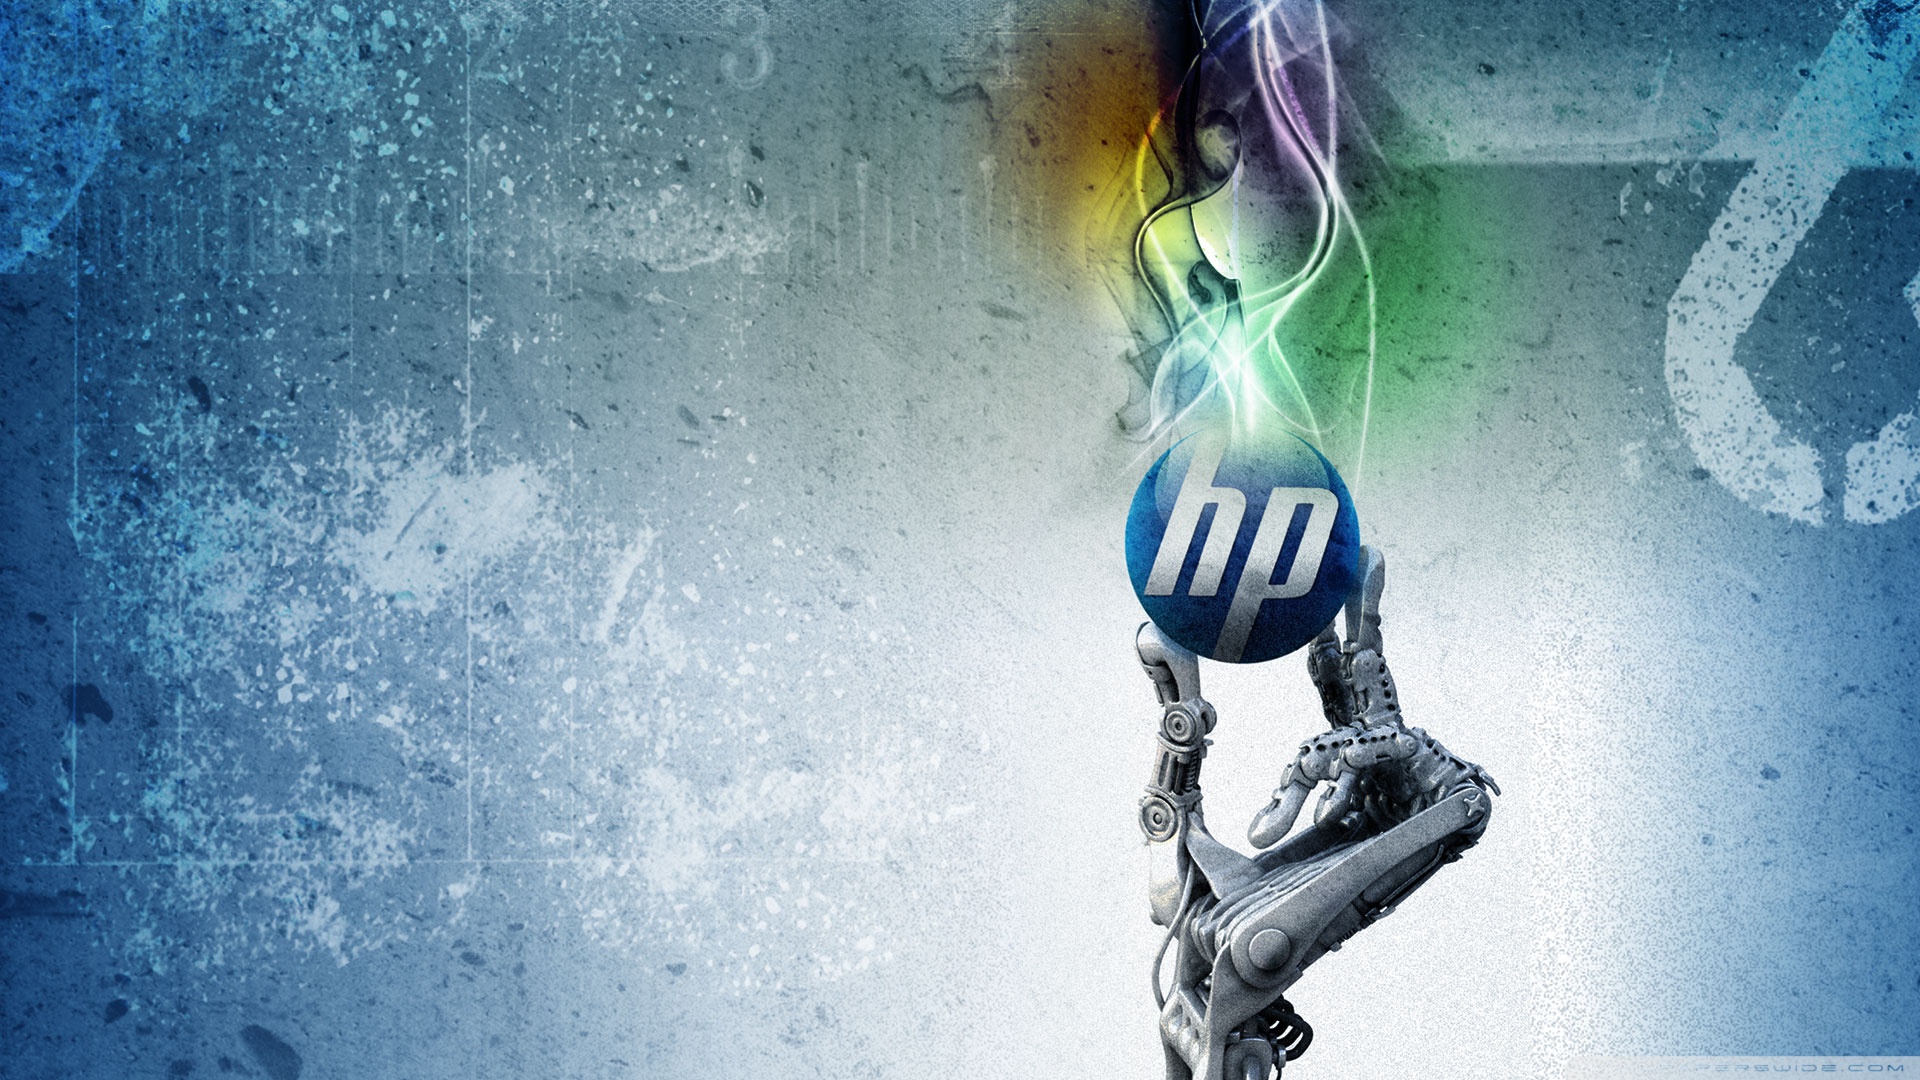 original hp wallpapers,graphic design,footwear,competition event,street dance,graphics